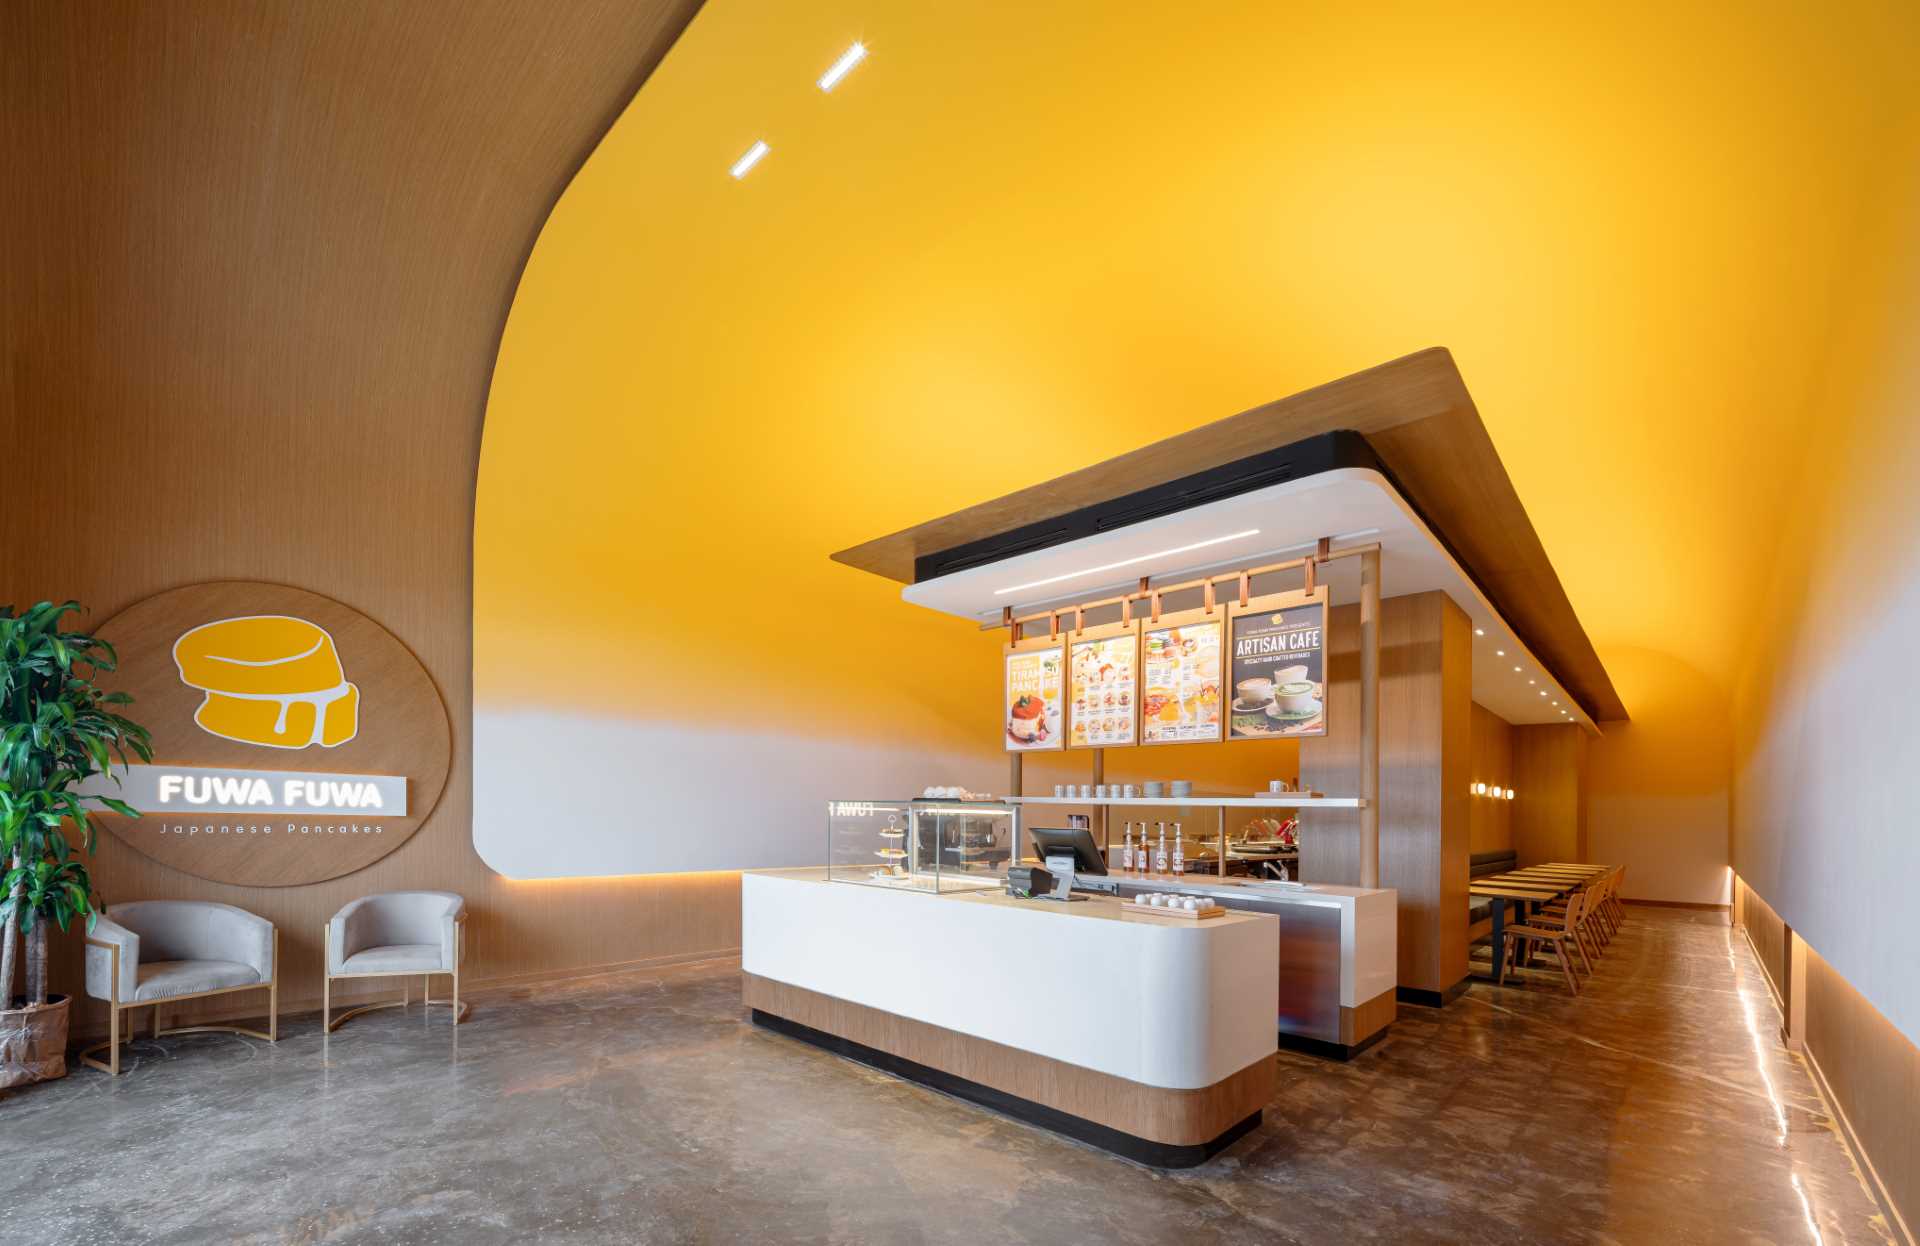 Visitors to this modern cafe are greeted by the soft curve and bright yellow of the high ceiling as it frames a modern temple-like structure.